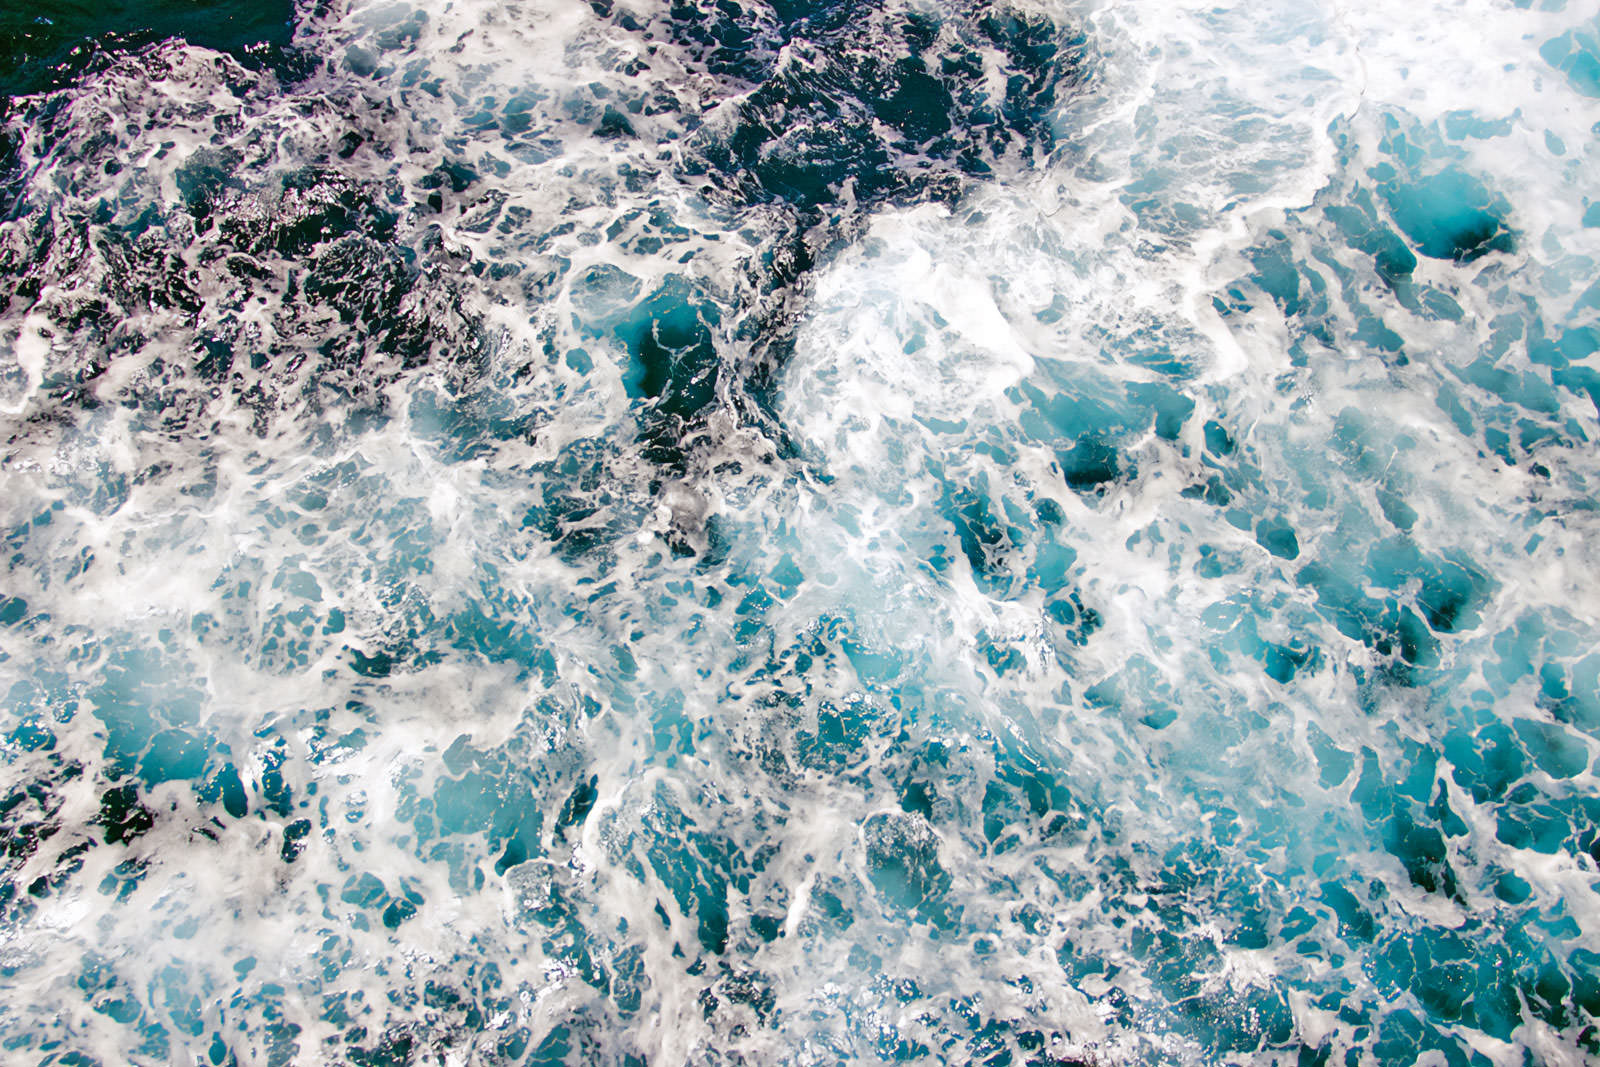 Turning the Tides of the Climate Talent Ecosystem, as Sea Change Advisors